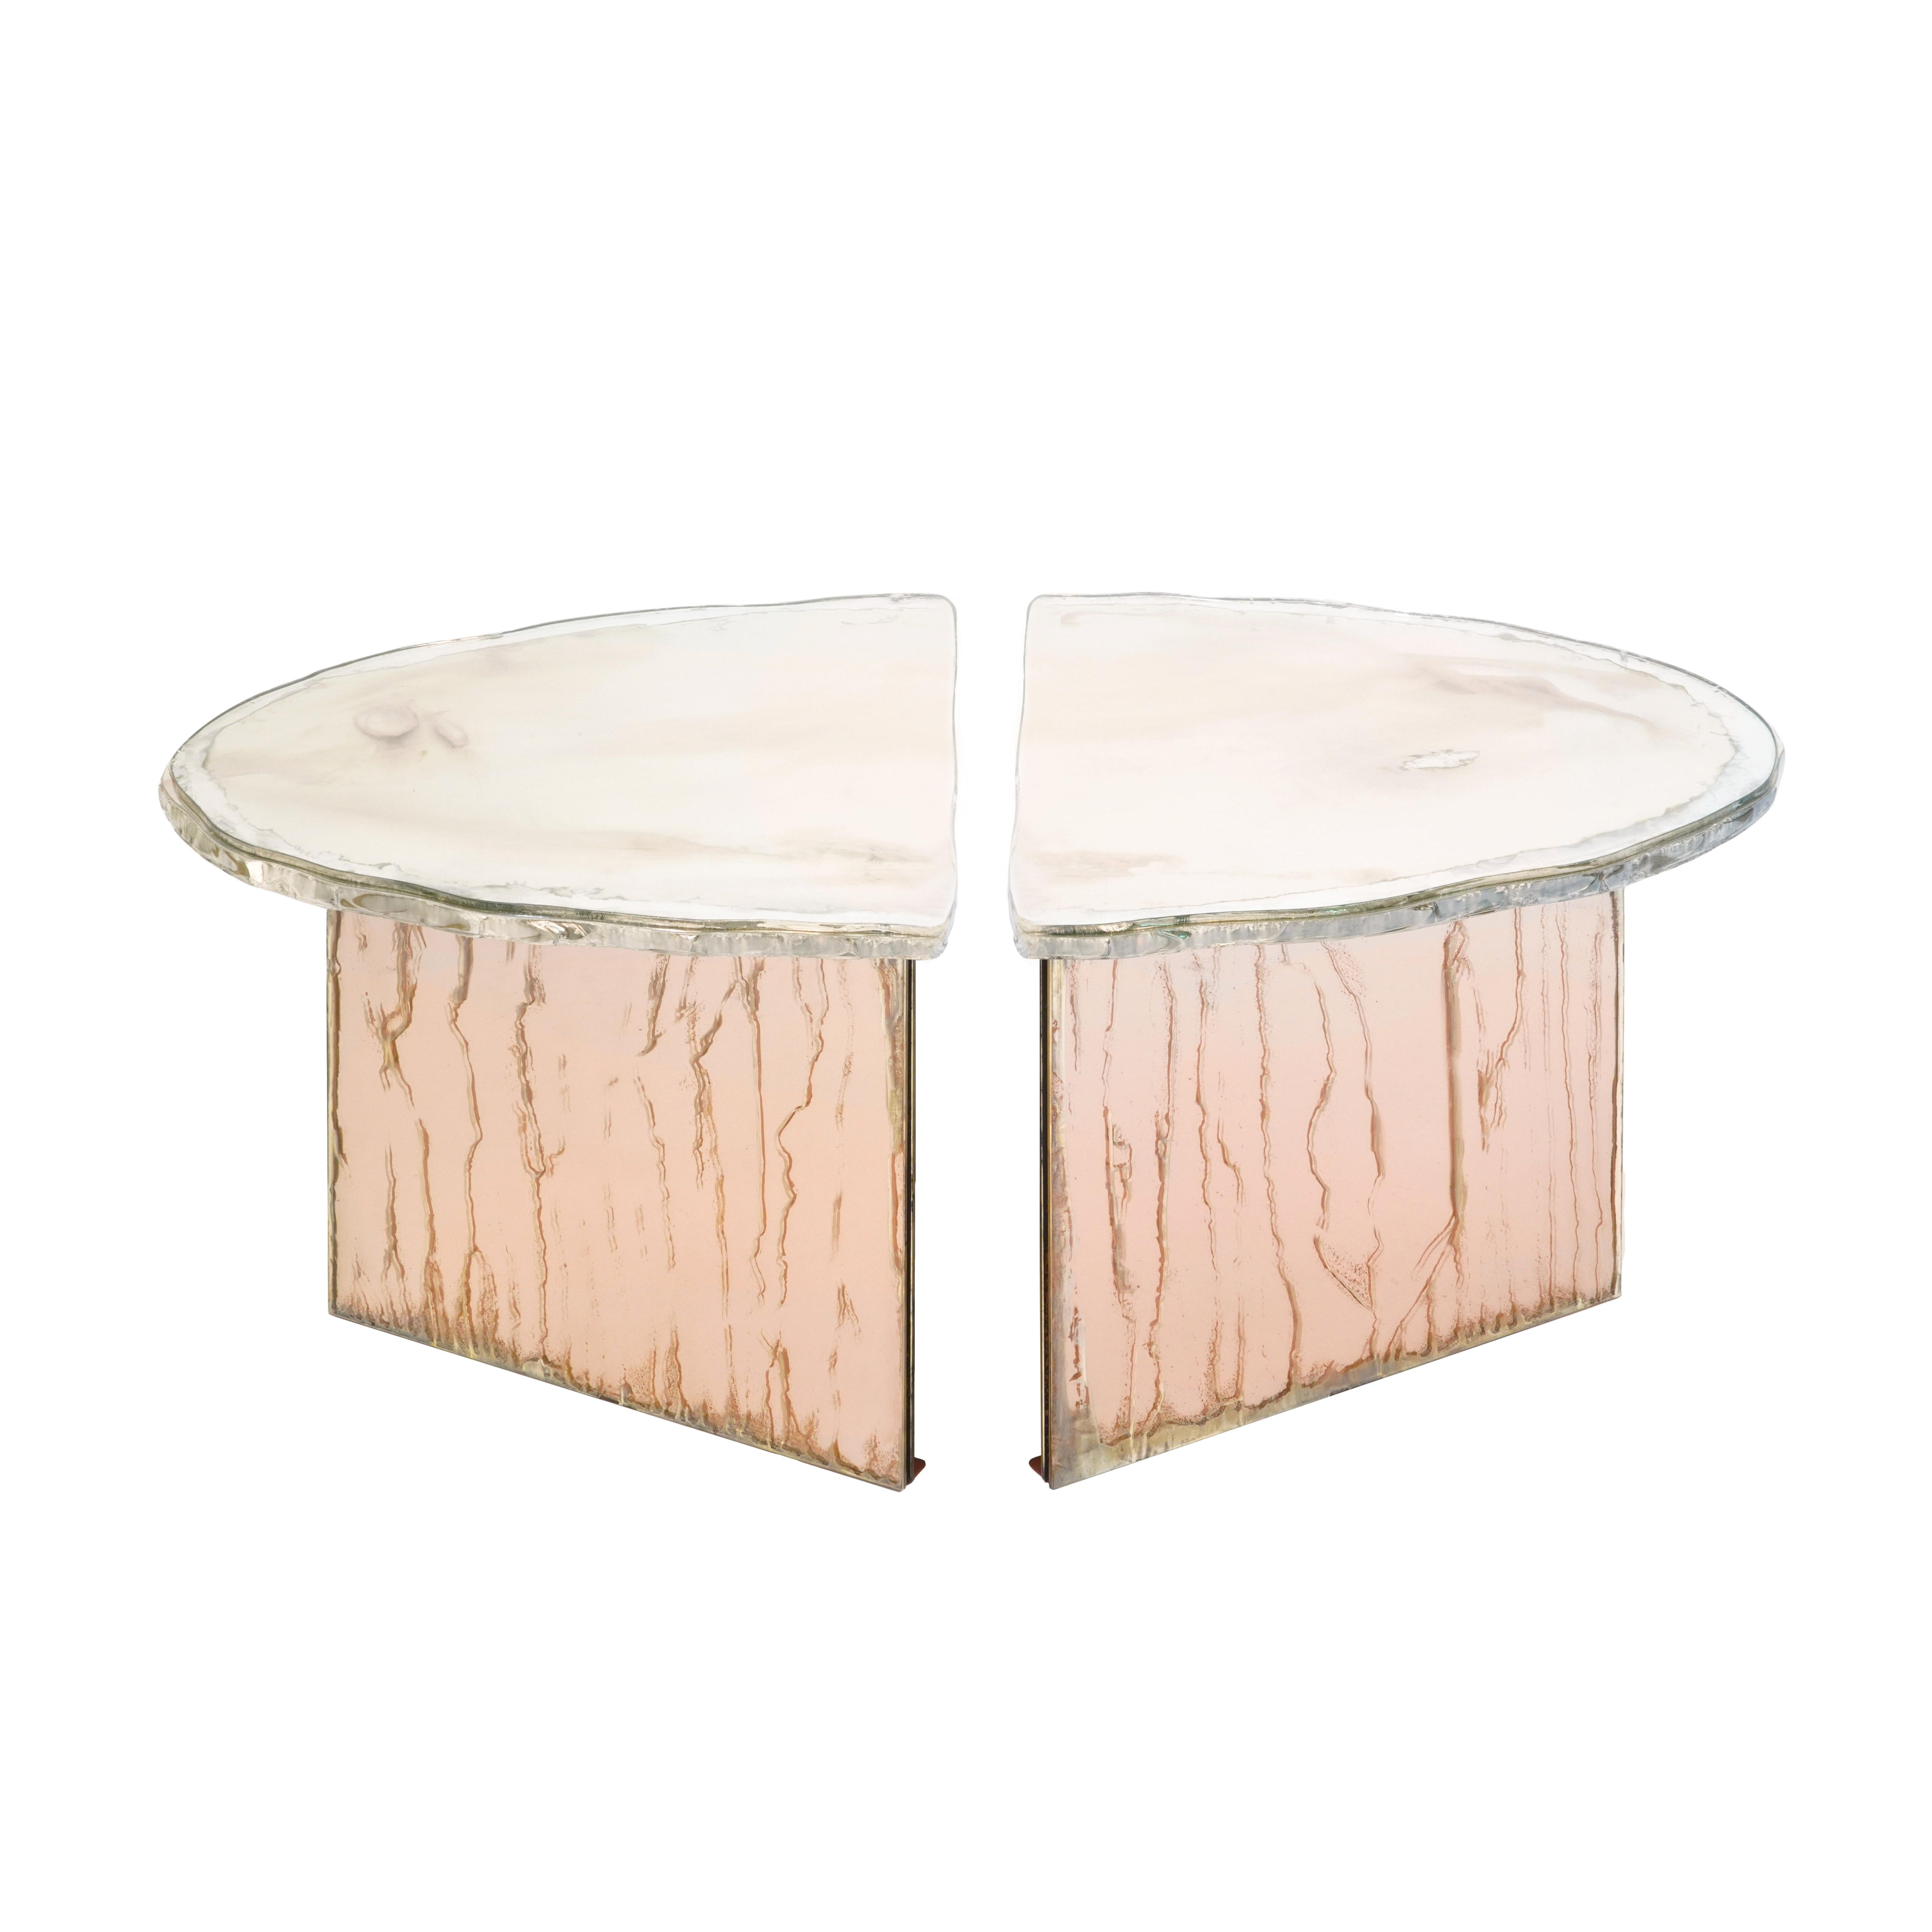 FLIGHT side-coffee table 
Enhance your elegance and radiate brilliance with our collection of silver tables Flight!
Exquisite pieces that add a touch of shimmer and glamor to your home interior.

Flight is designed with a V-shaped silhouette that